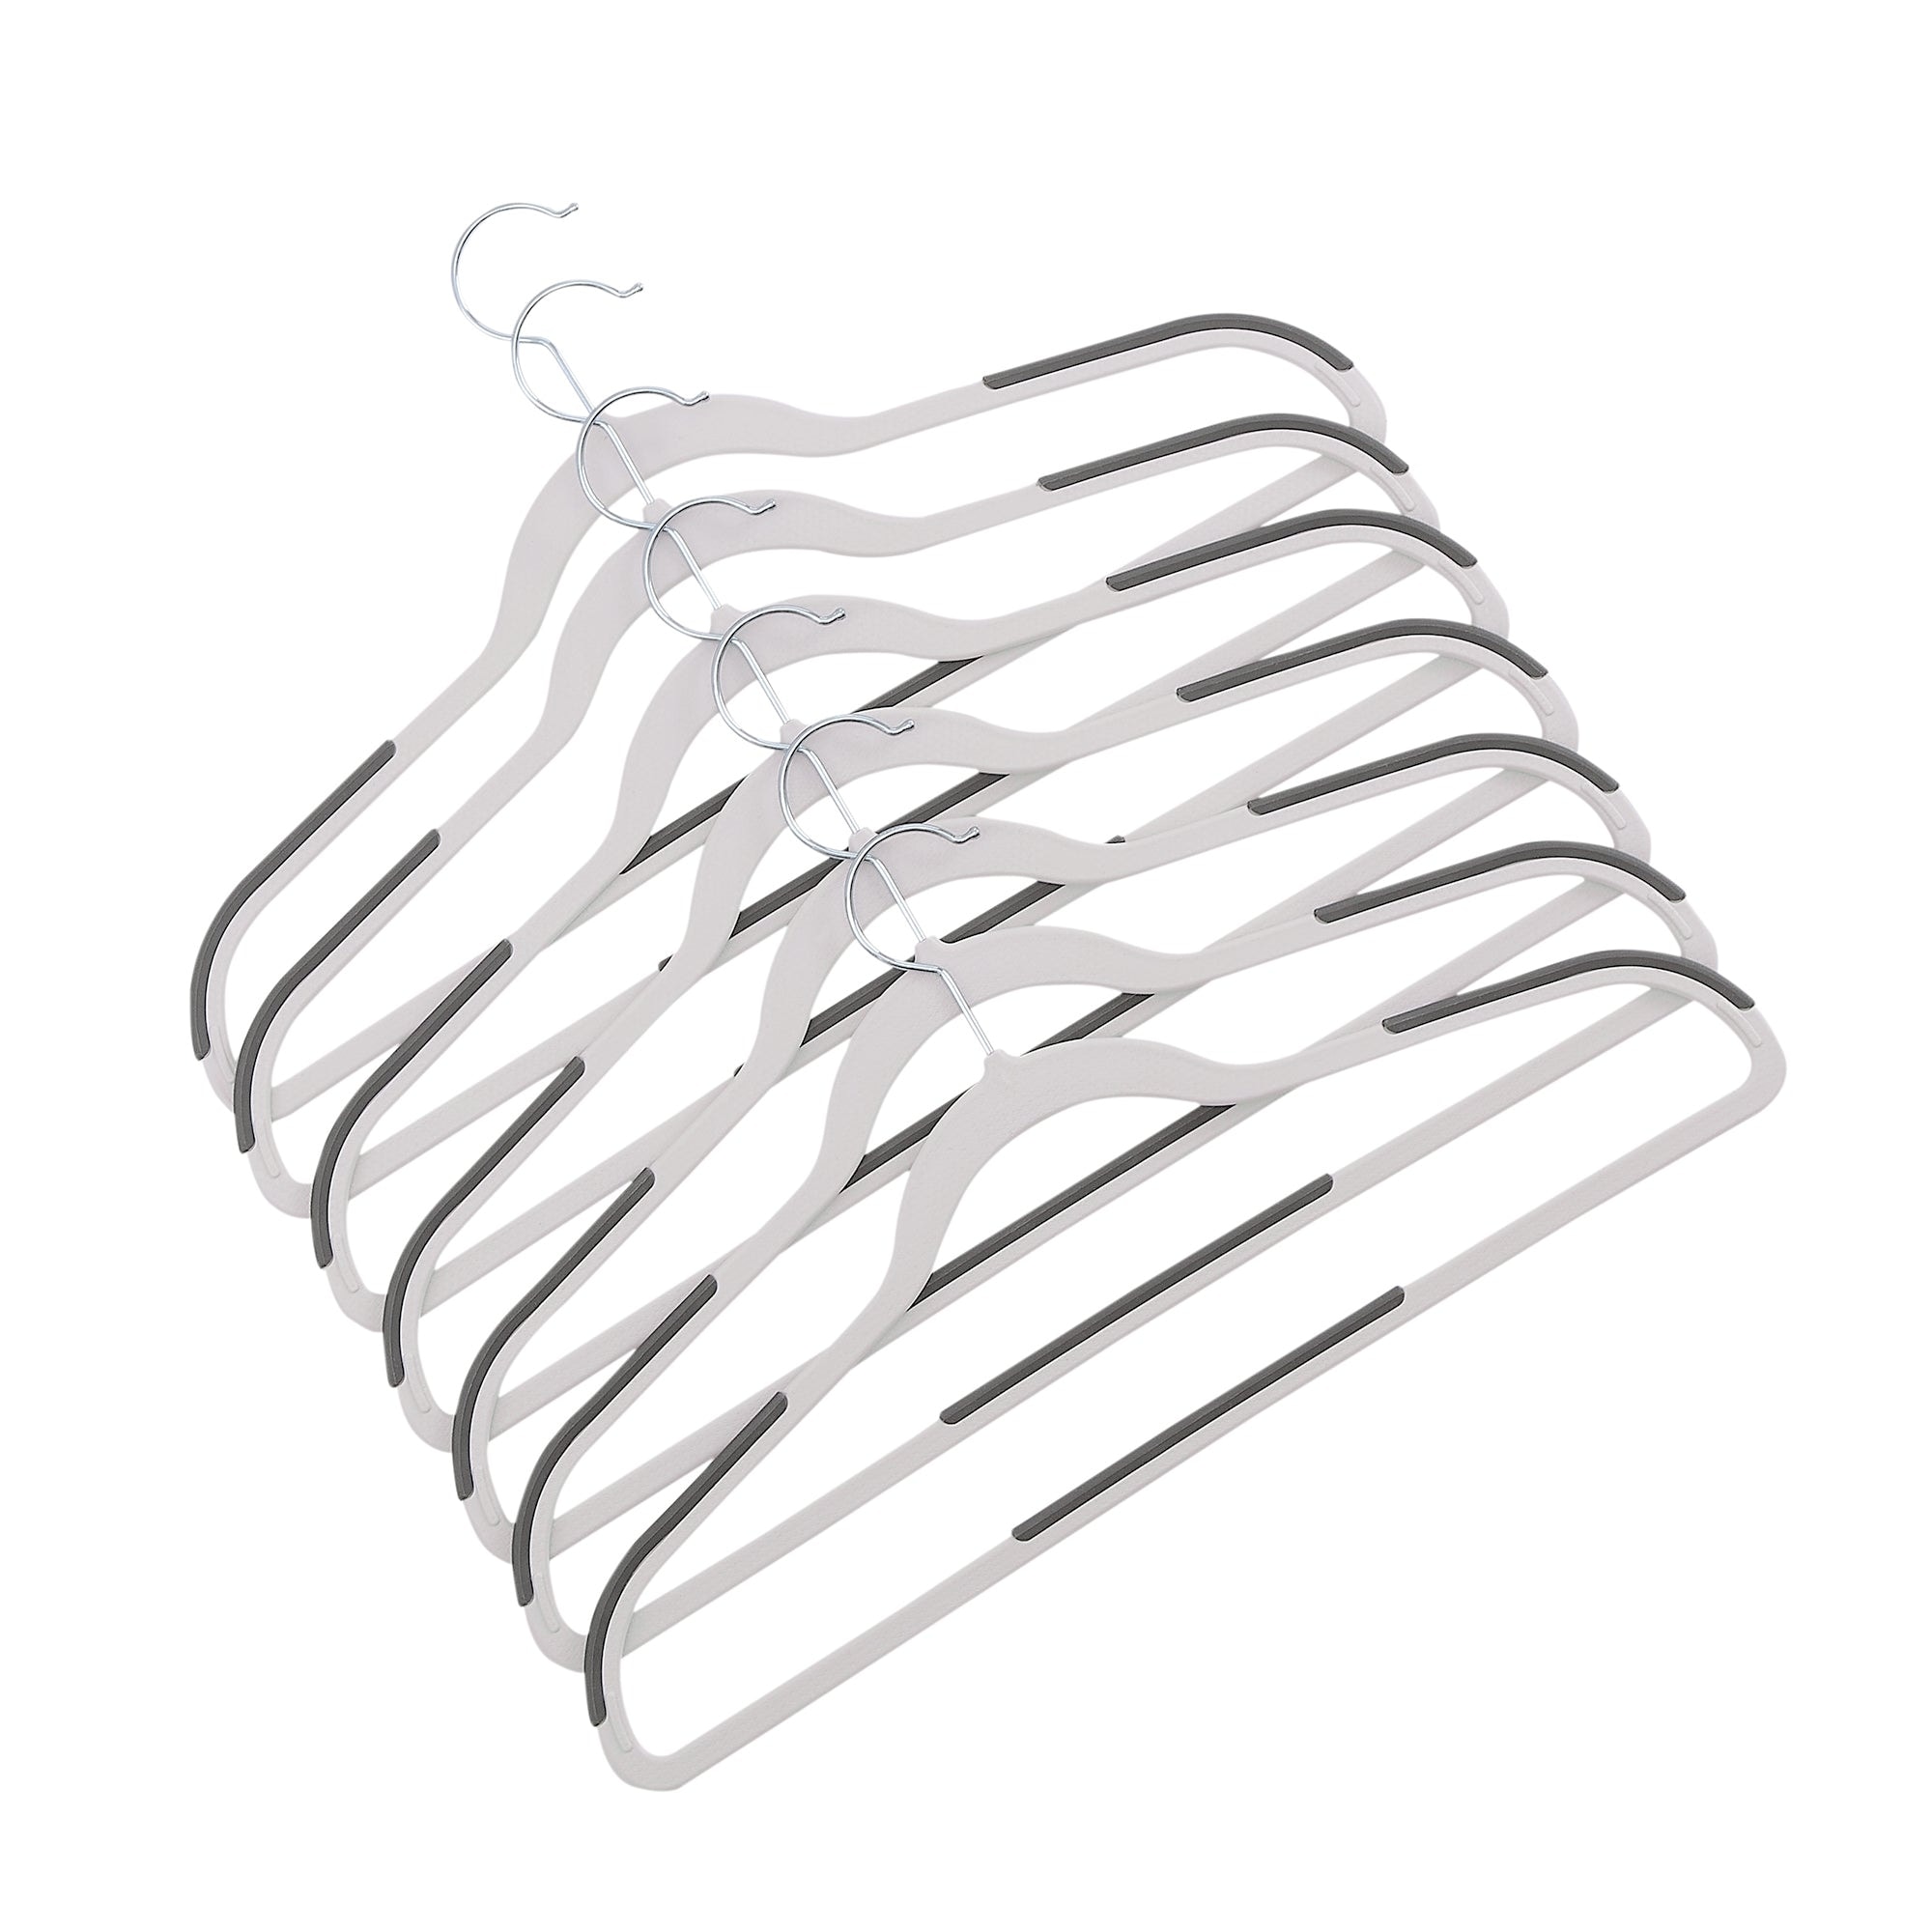 https://ak1.ostkcdn.com/images/products/is/images/direct/8e67f684ad547ca8478944b2308b68743d74dd29/100-Pack-Clothes-Hangers-Plastic-Coat-Hangers-Non-Slip-Space-Saving-Swivel-Hook.jpg